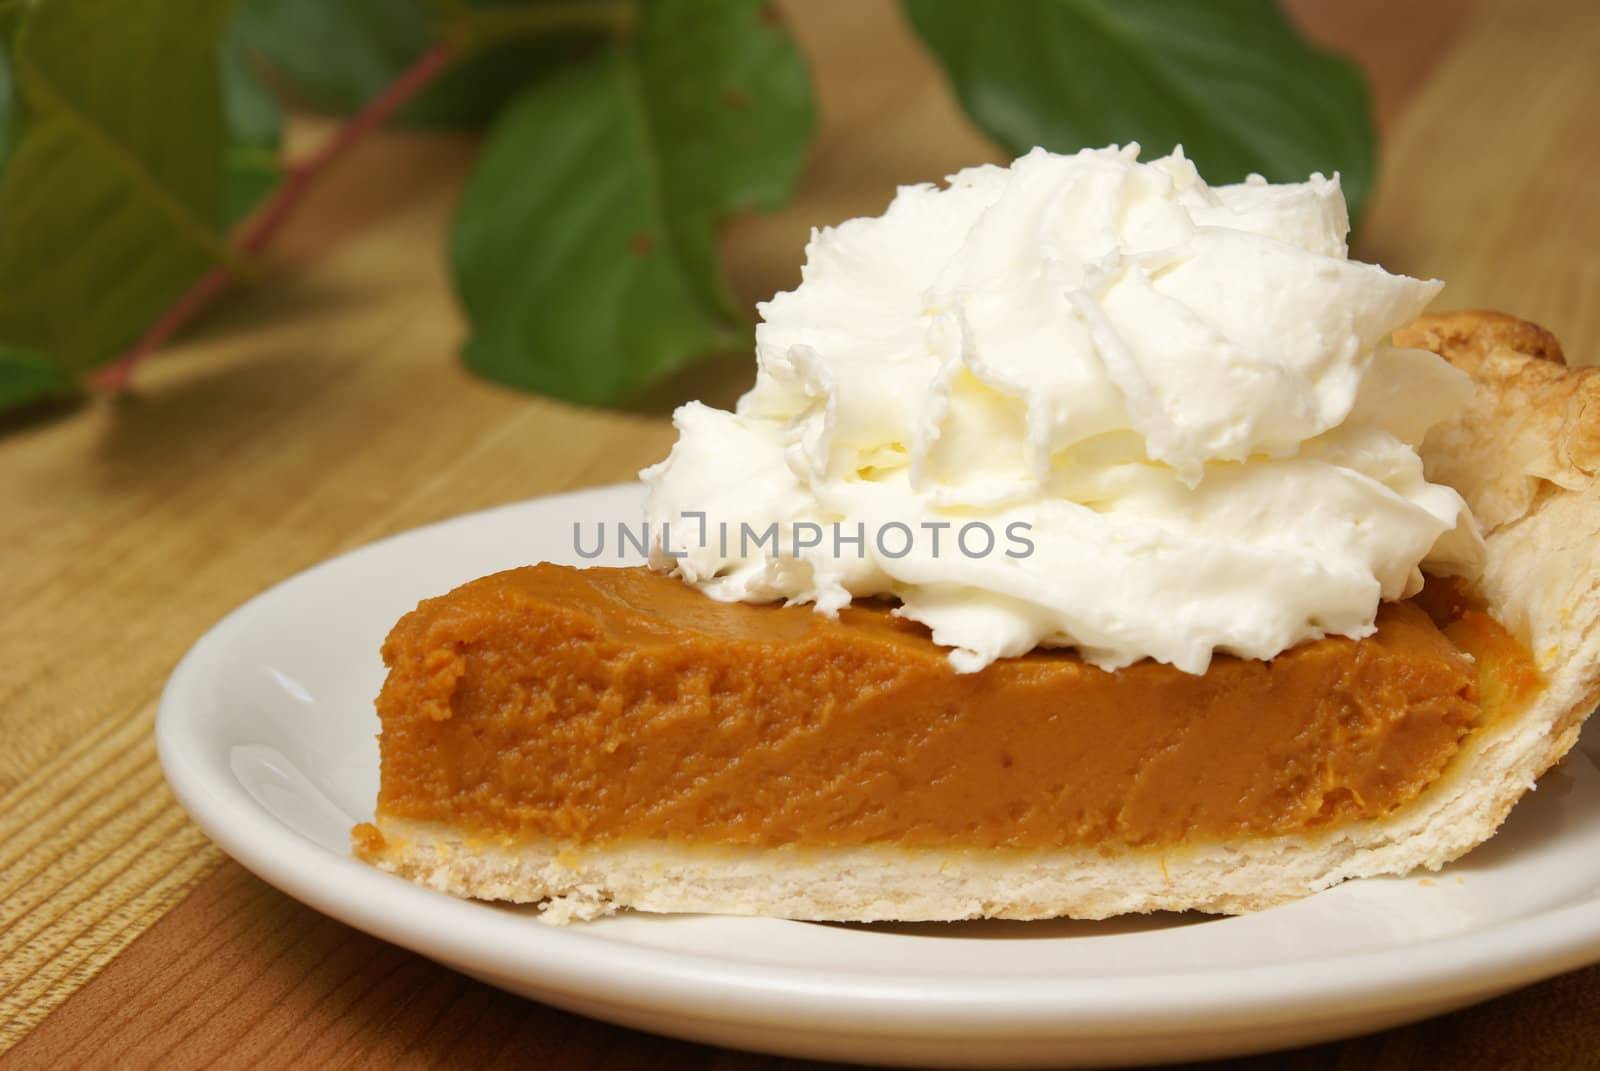 A fresh slice of pumpkin pie with whipped cream on top.